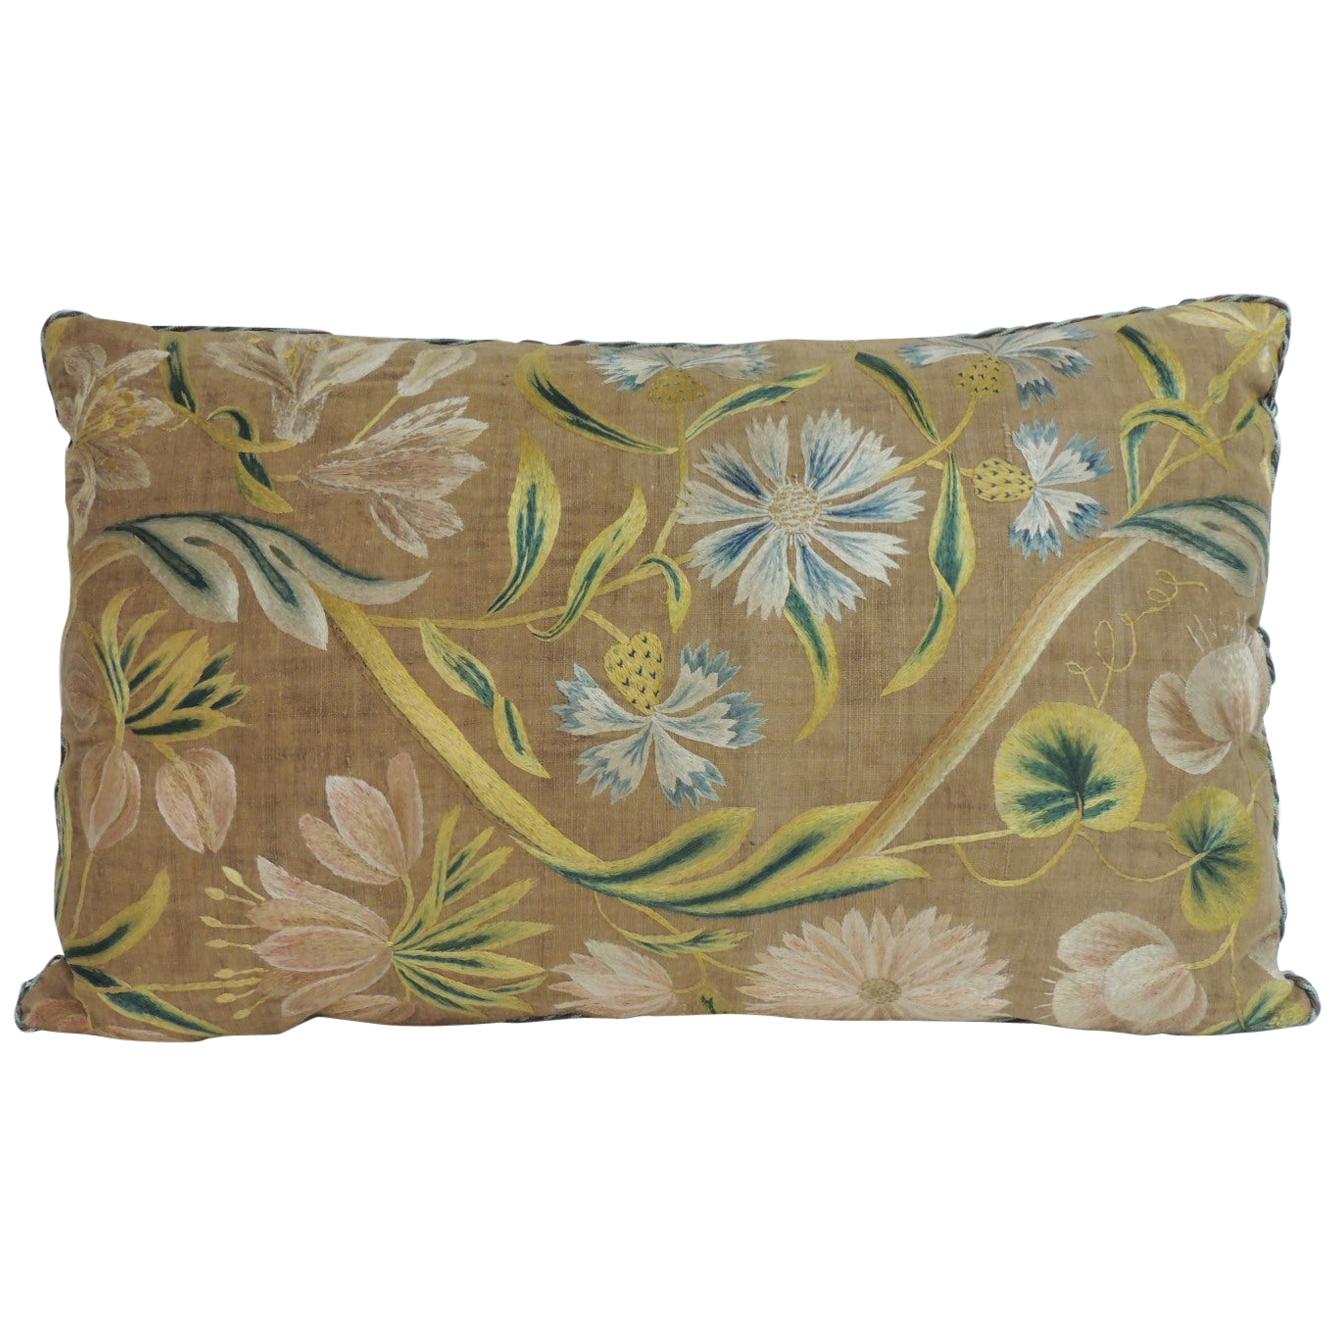 Antique Venetian Floral Embroidered Large Bolster Decorative Pillow